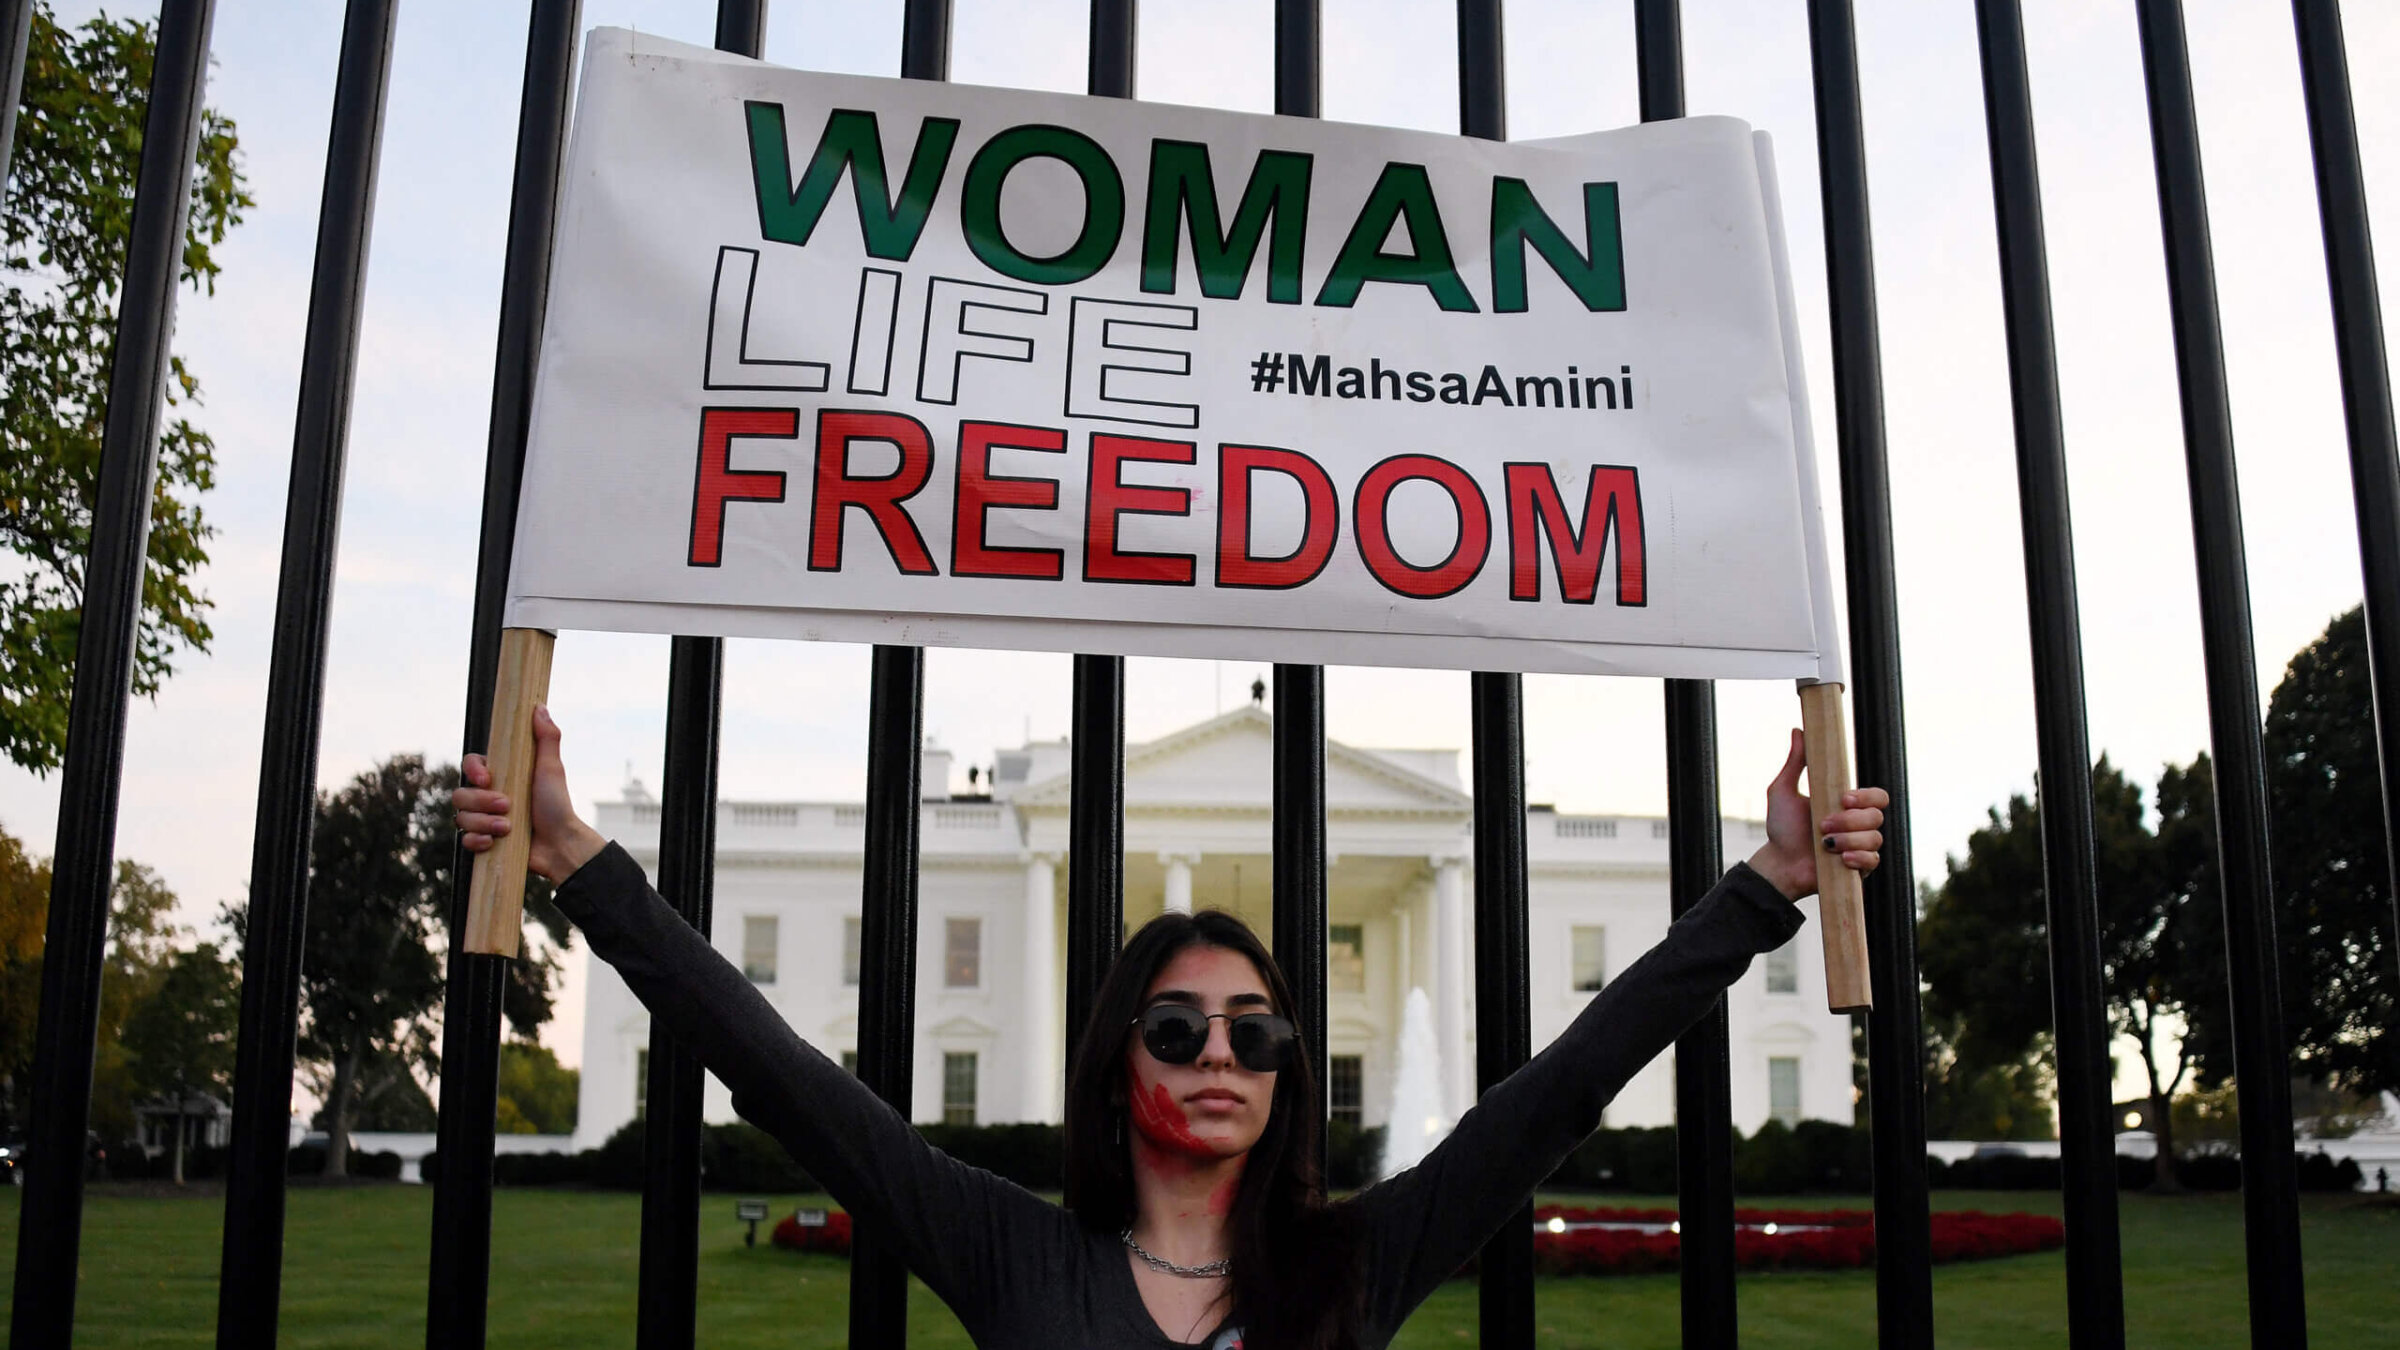 A woman holds a placard as protesters march in solidarity with protesters in Iran in front of the White House in Washington, DC, on October 22, 2022.